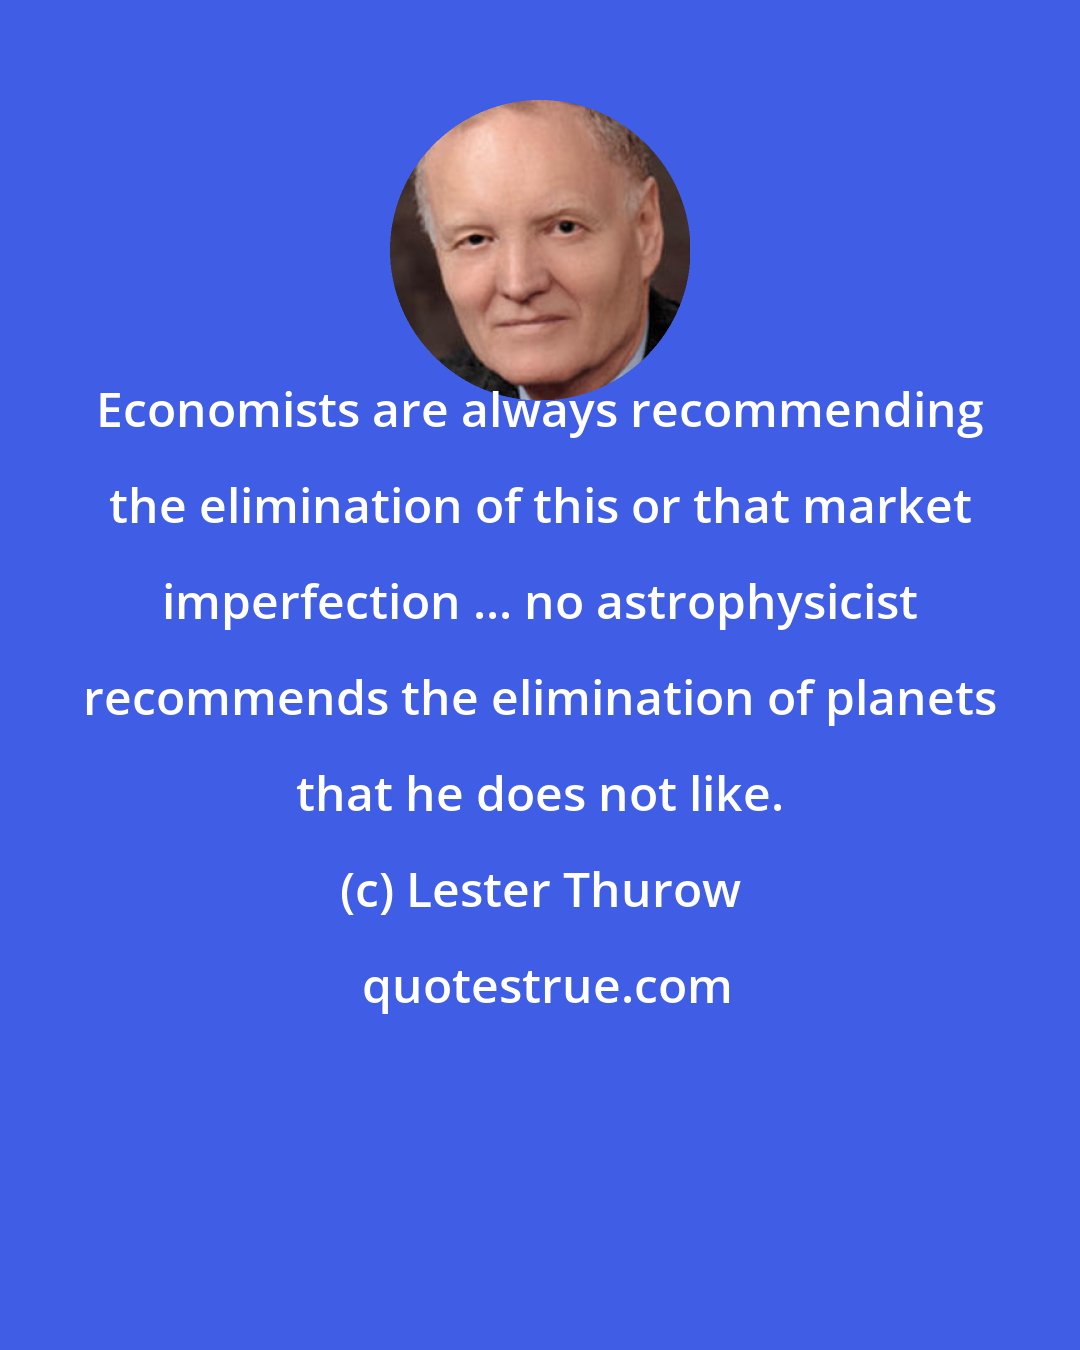 Lester Thurow: Economists are always recommending the elimination of this or that market imperfection ... no astrophysicist recommends the elimination of planets that he does not like.